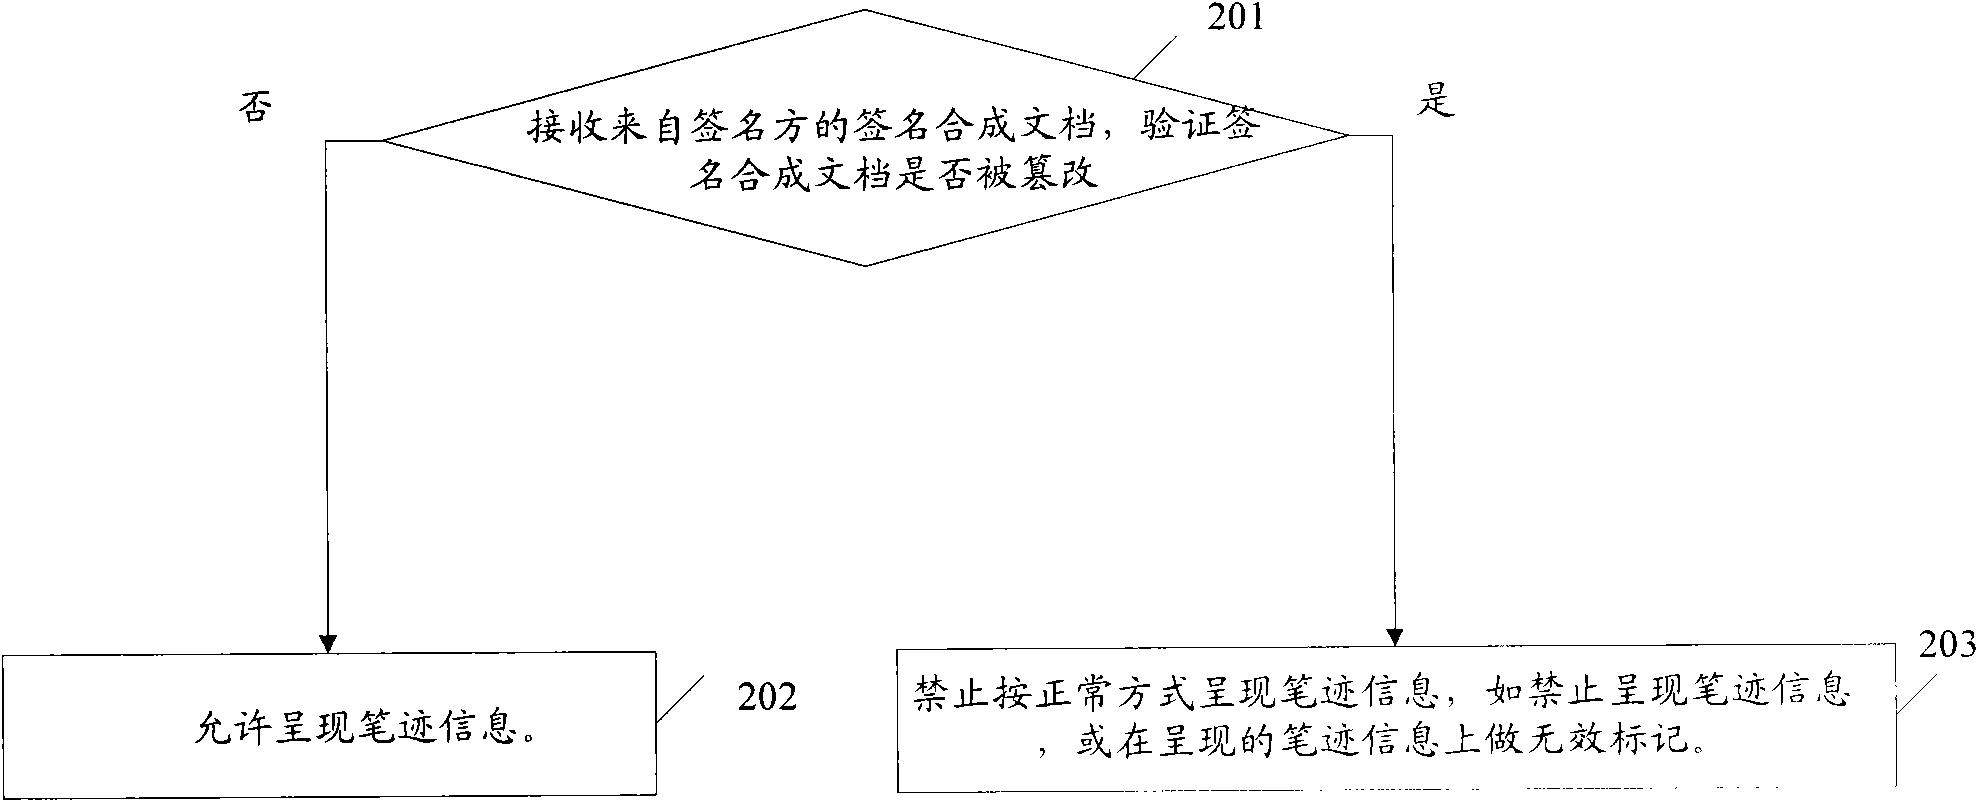 Electronic document signature protecting method and system